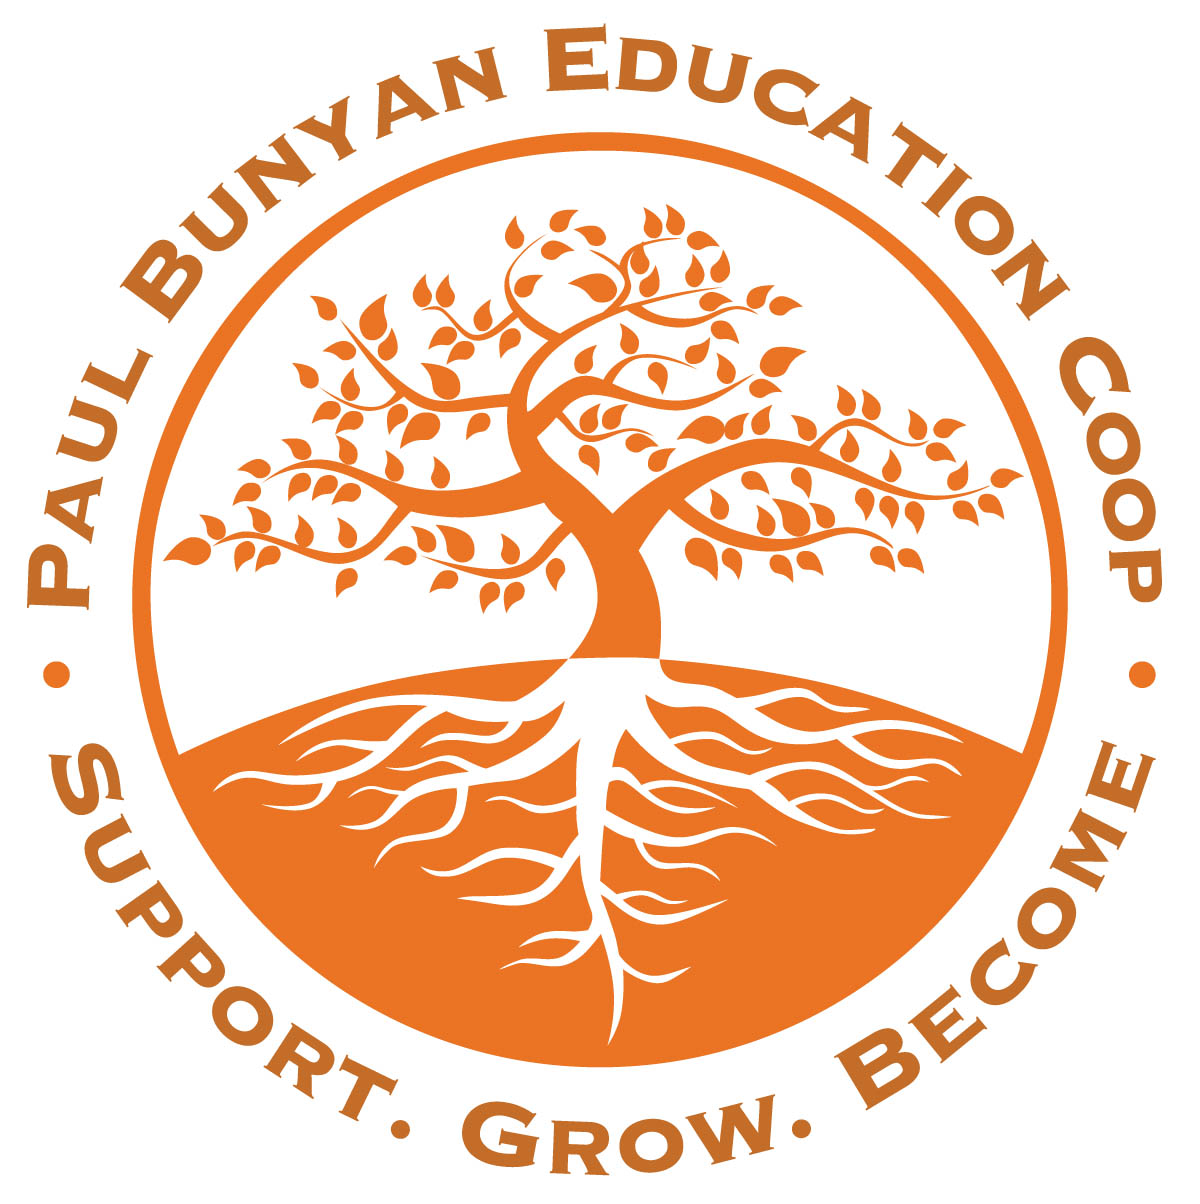 An image of our sign.  It says Paul Bunyan Education Cooperative with a picture of Paul Bunyan and two pine tree images behind the sign on the left.